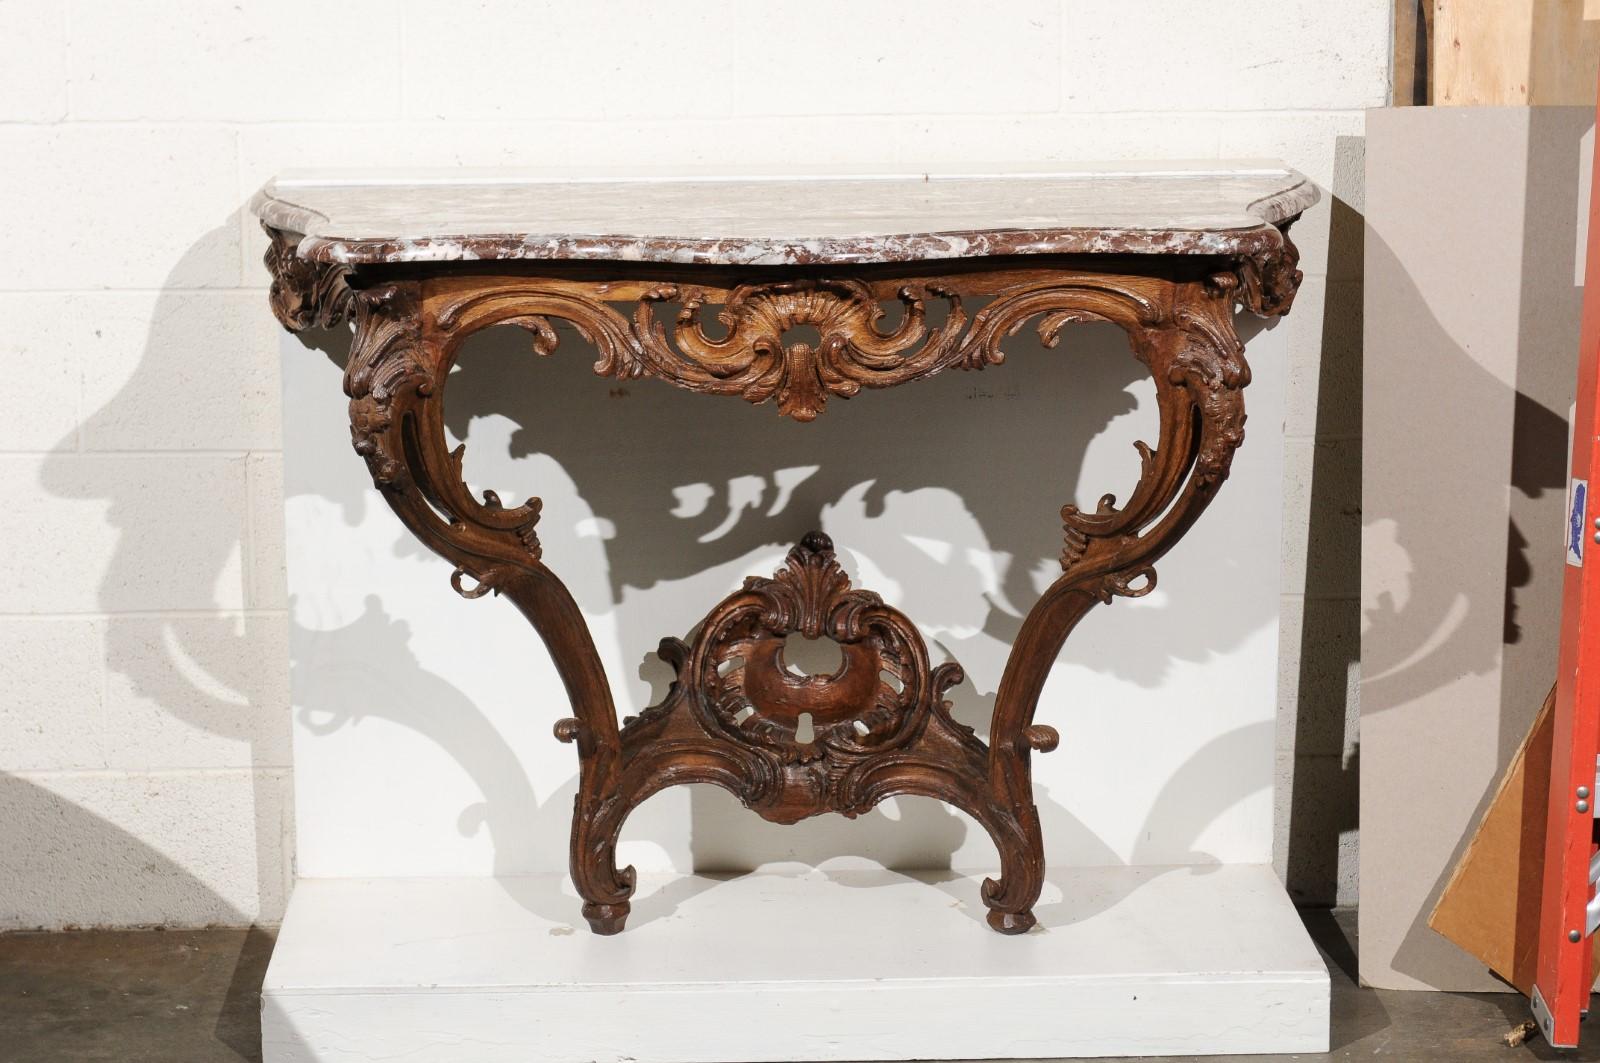 An 18th Century French Regence Period Oak Wall Mounted Console with Rouge Royale Marble Top. The base is solid and features beautifully carved oak foliage featuring symmetrical acanthus leaf, scrollwork and a hooked foot. Rouge Royal is a beautiful